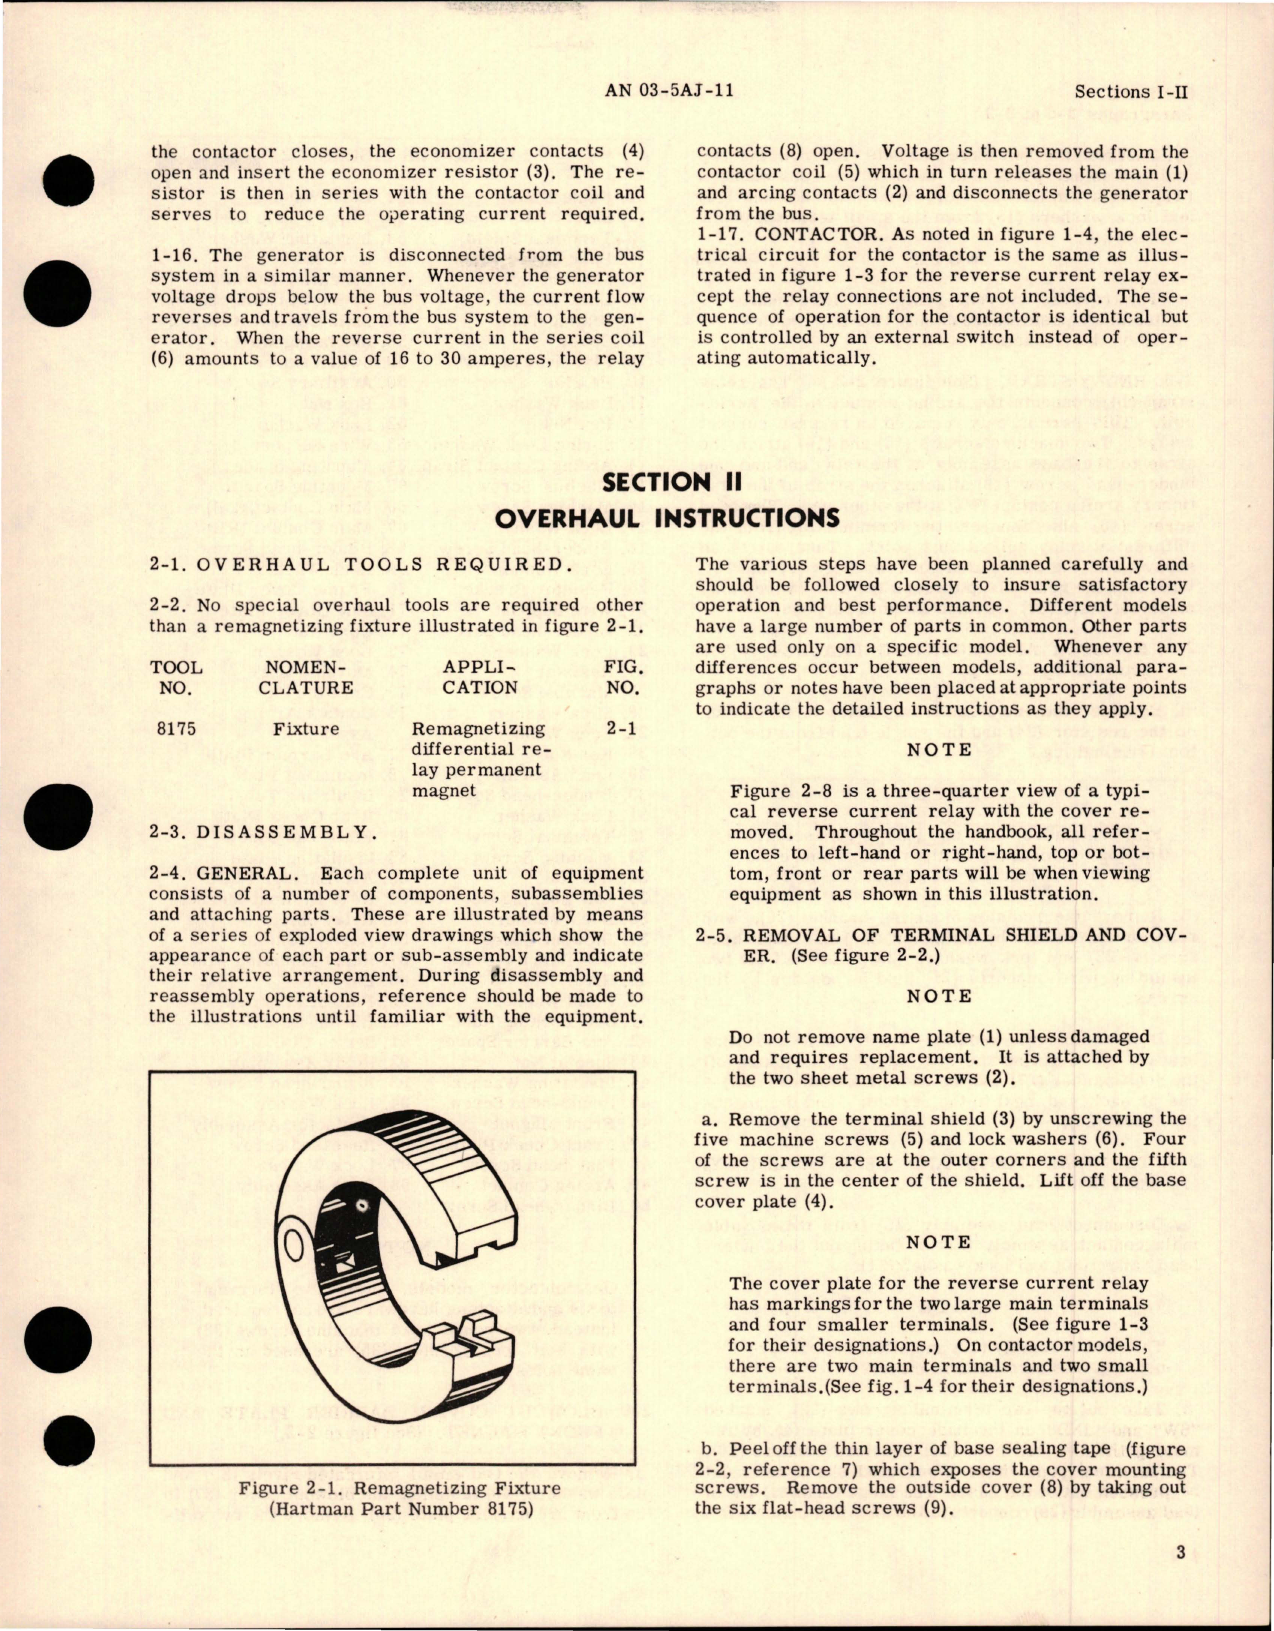 Sample page 7 from AirCorps Library document: Overhaul Instructions for Reverse Current Relay and Contactor - Type Q-1 - Models A750B, A-751B